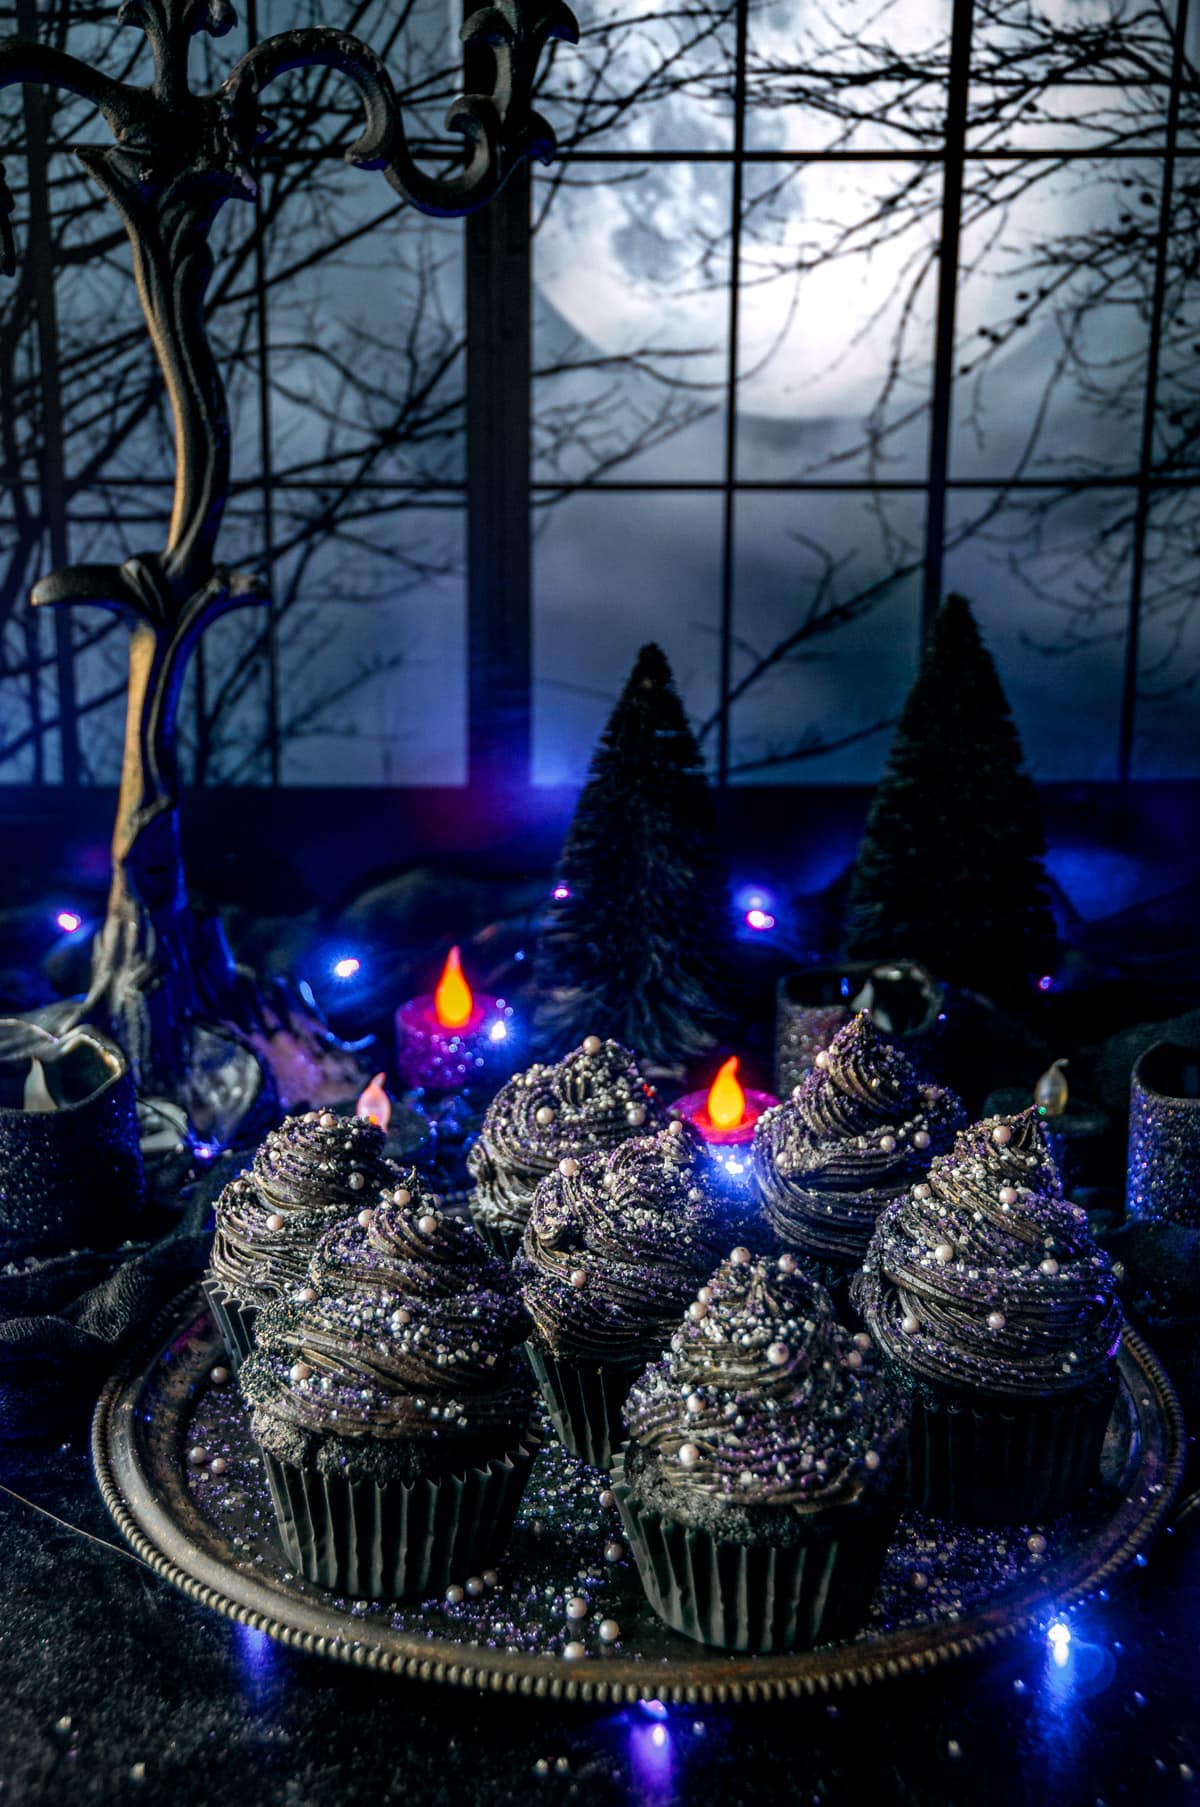 Black velvet cupcakes topped with sanding sugar and sprinkles on gray metal plate with purple lights and candles in background.